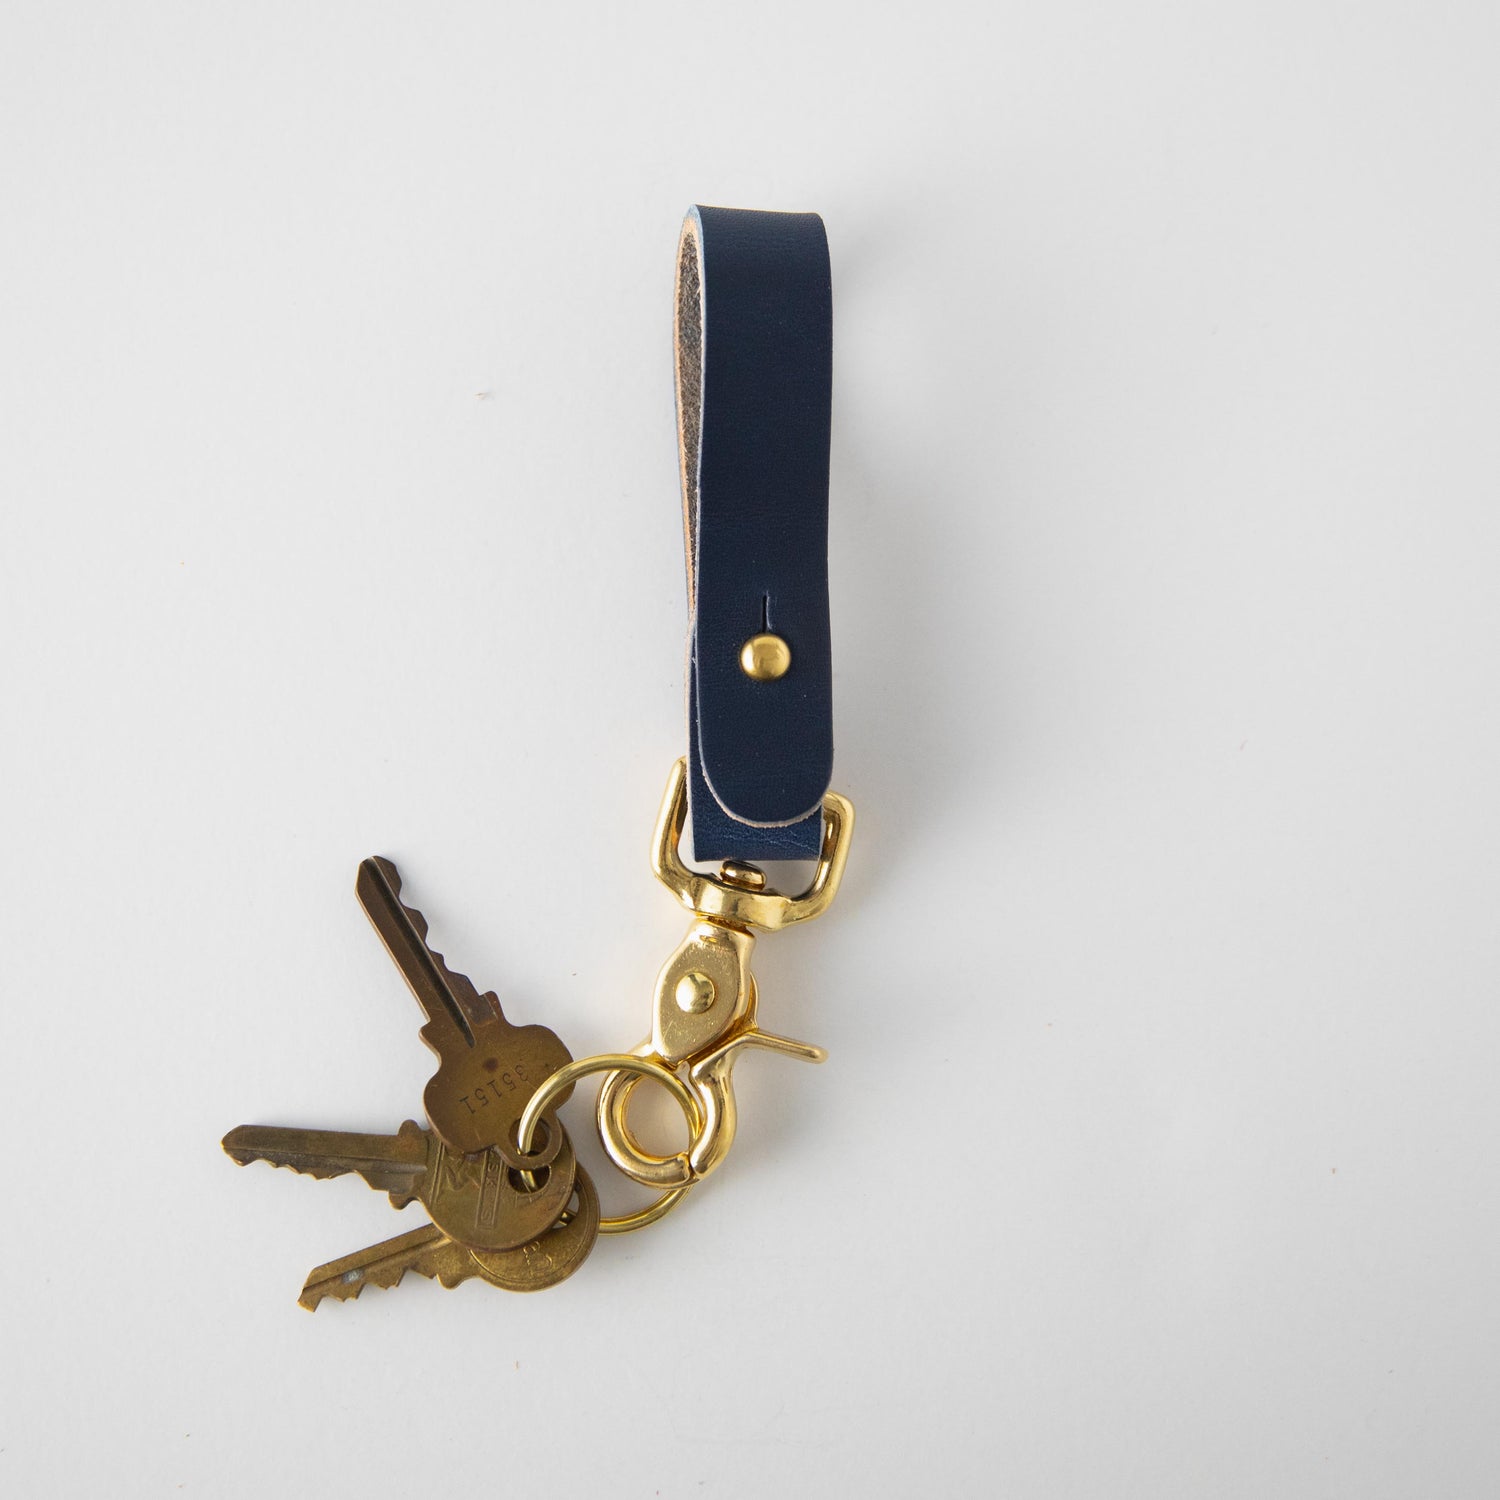 Leather Keychains: Navy Key Lanyard | Leather Key Rings by KMM & Co. Yes